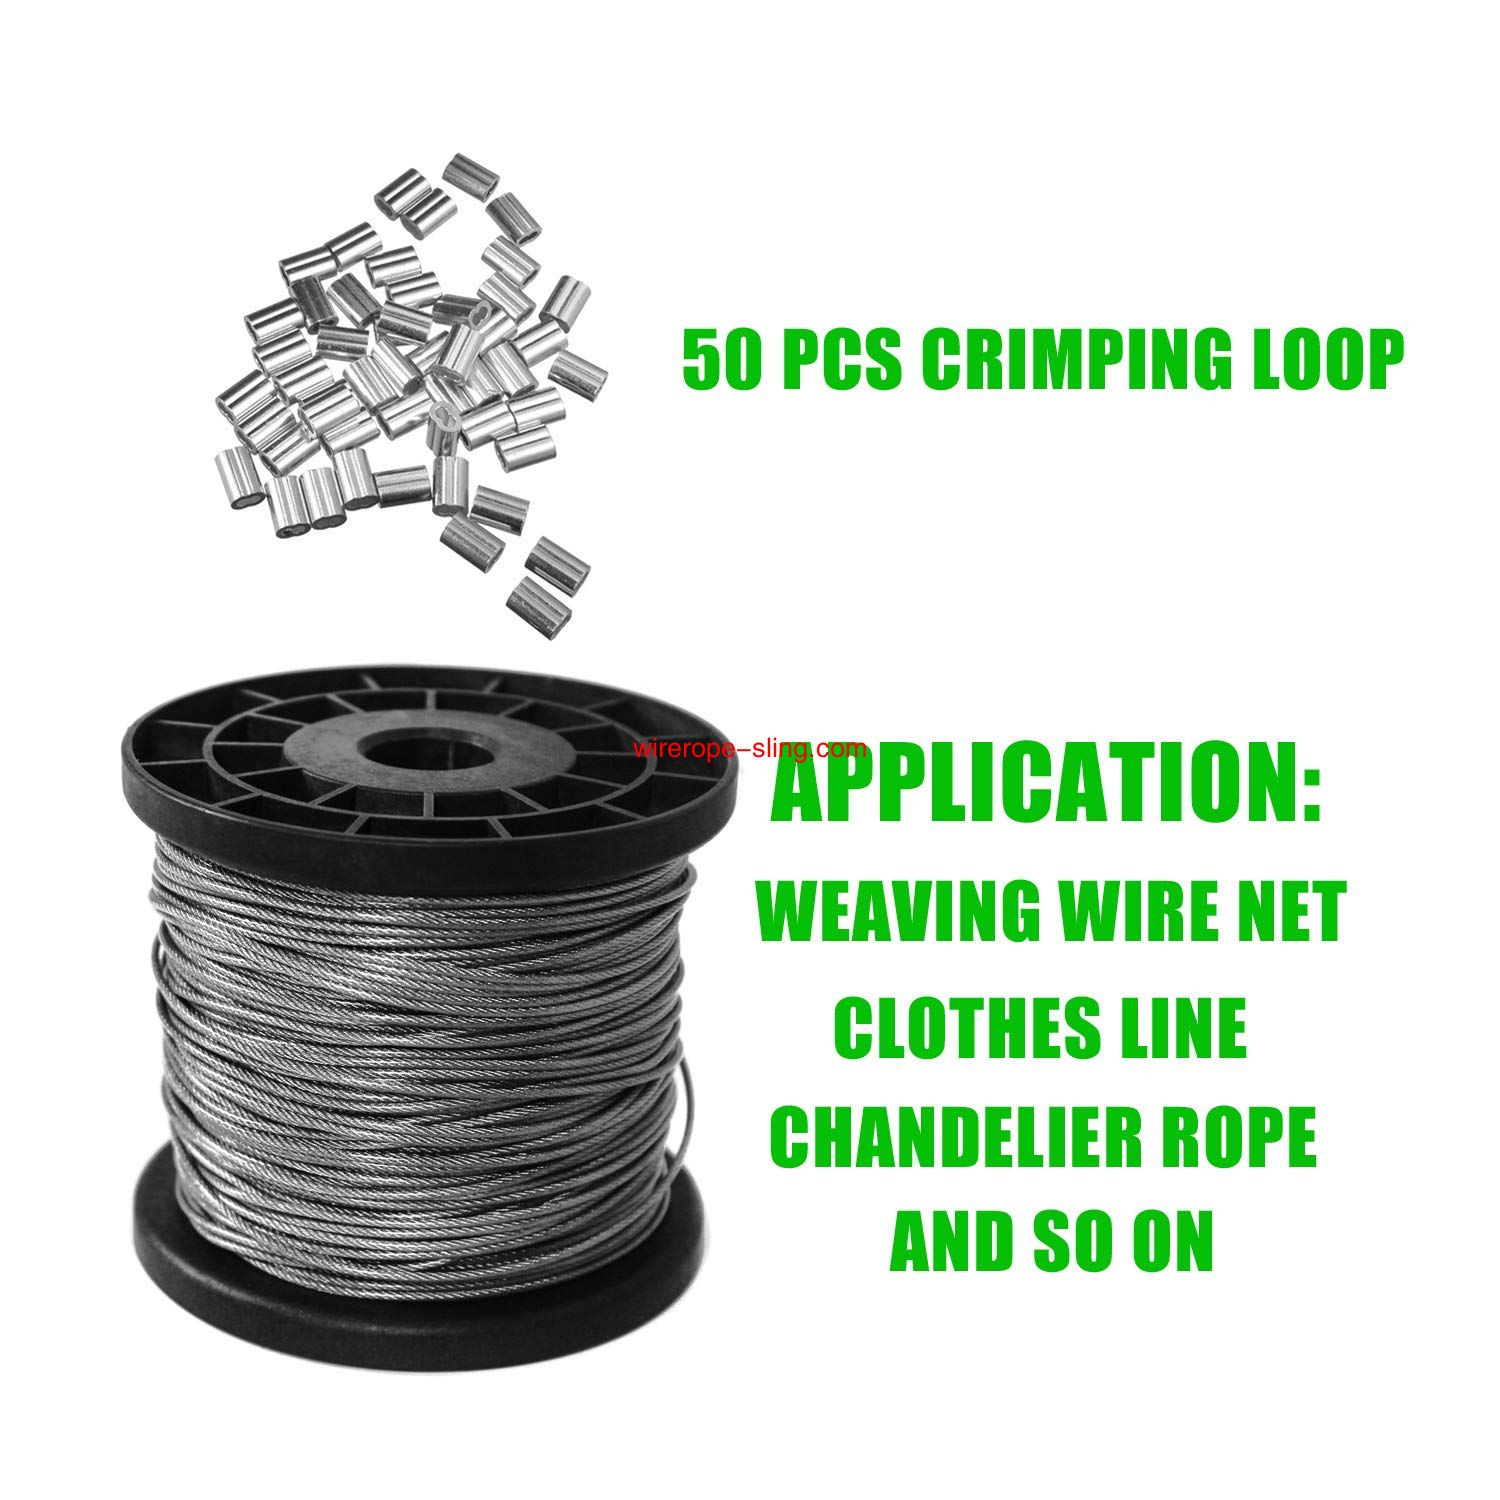 1/16 Inch Vinyl Coated Wire Rope Kit,330 Feet Stainless Steel 304 Wire Rope with 50 PCS Aluminum Crimping Loop and 10 PCS Clamps